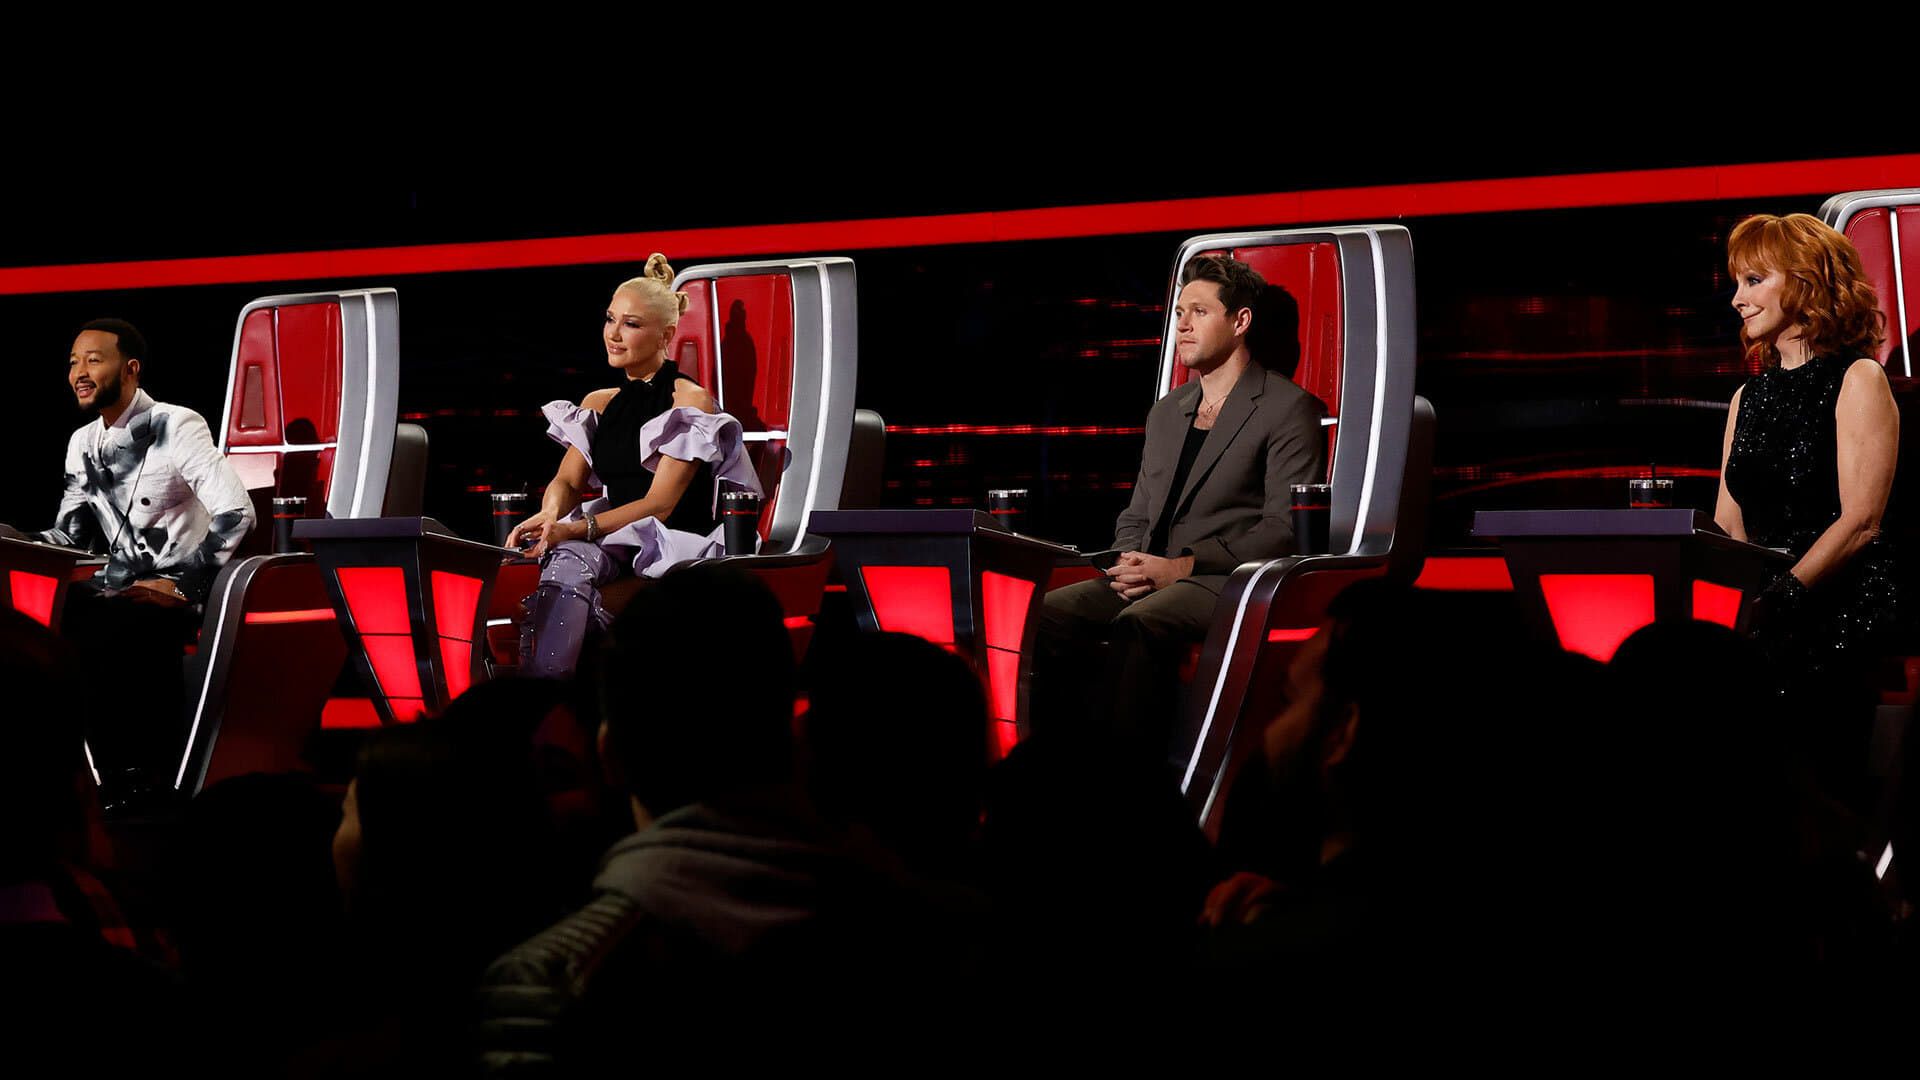 The Voice background